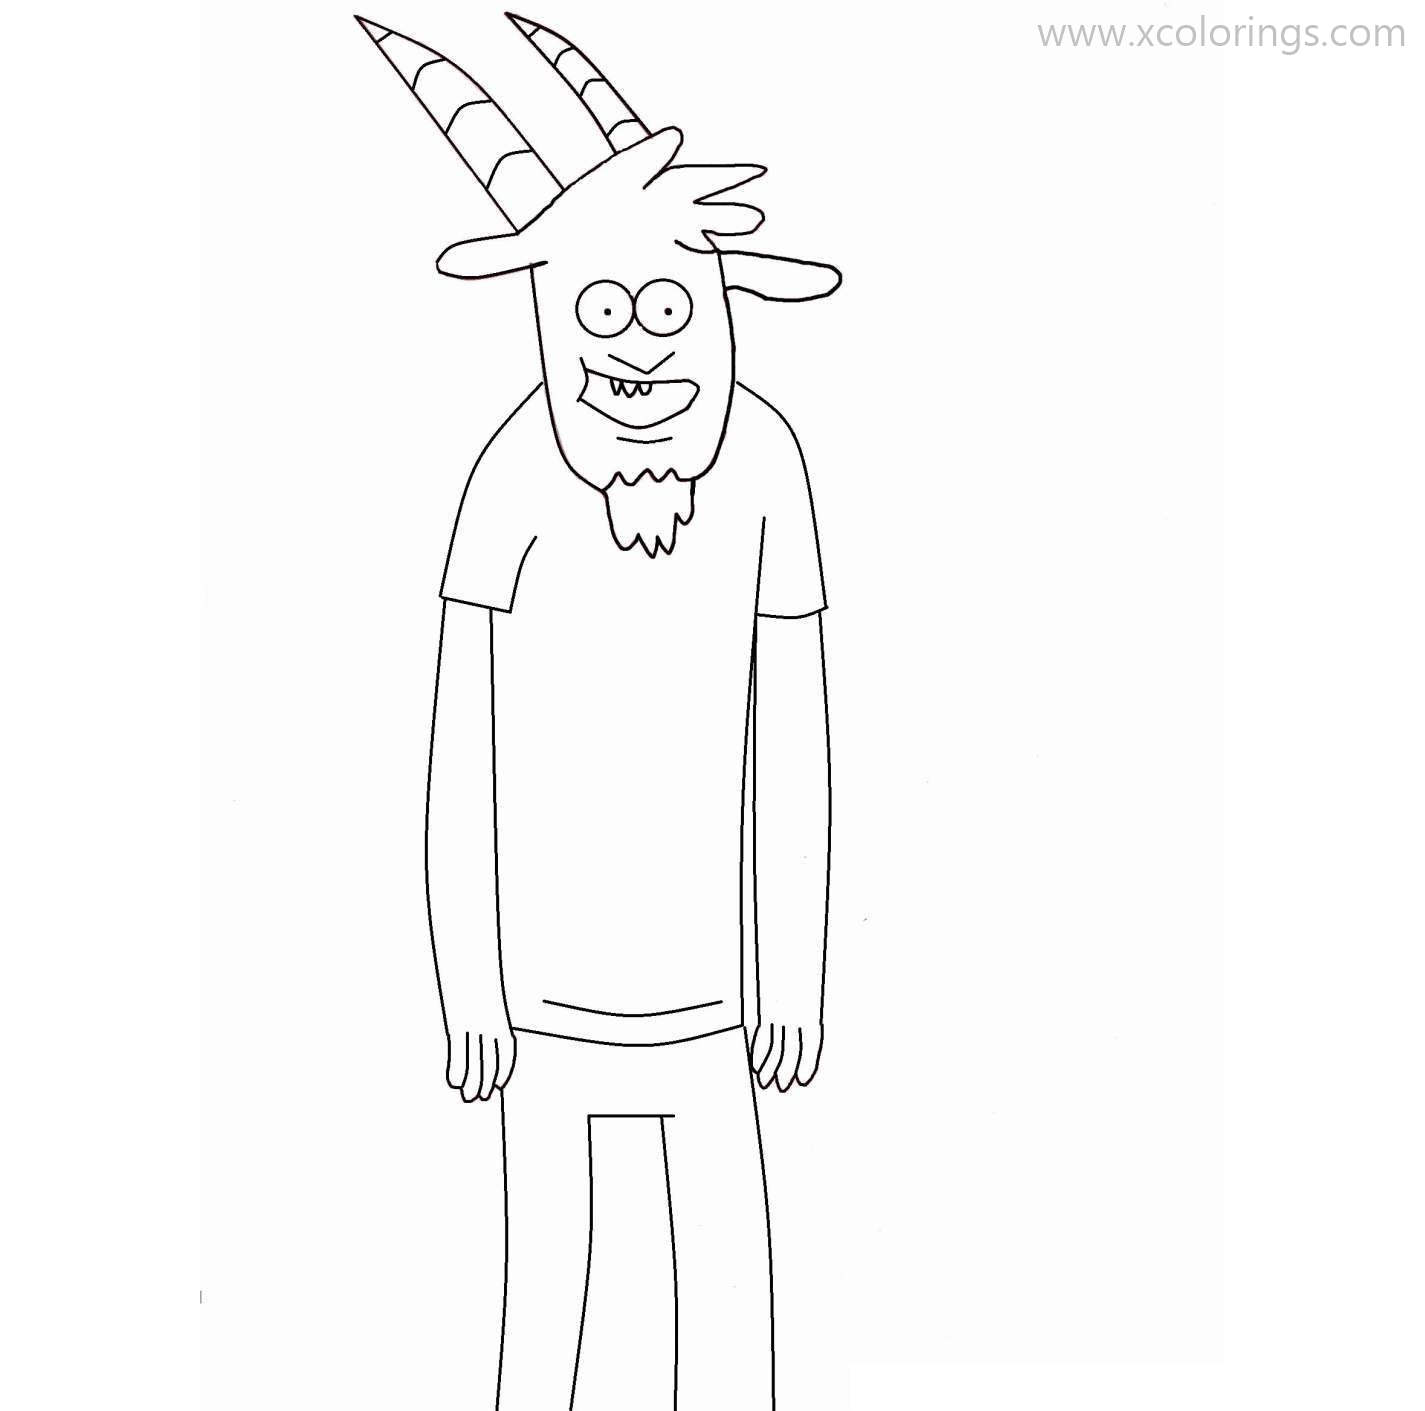 Free Regular Show Coloring Pages Thomas the Goat printable